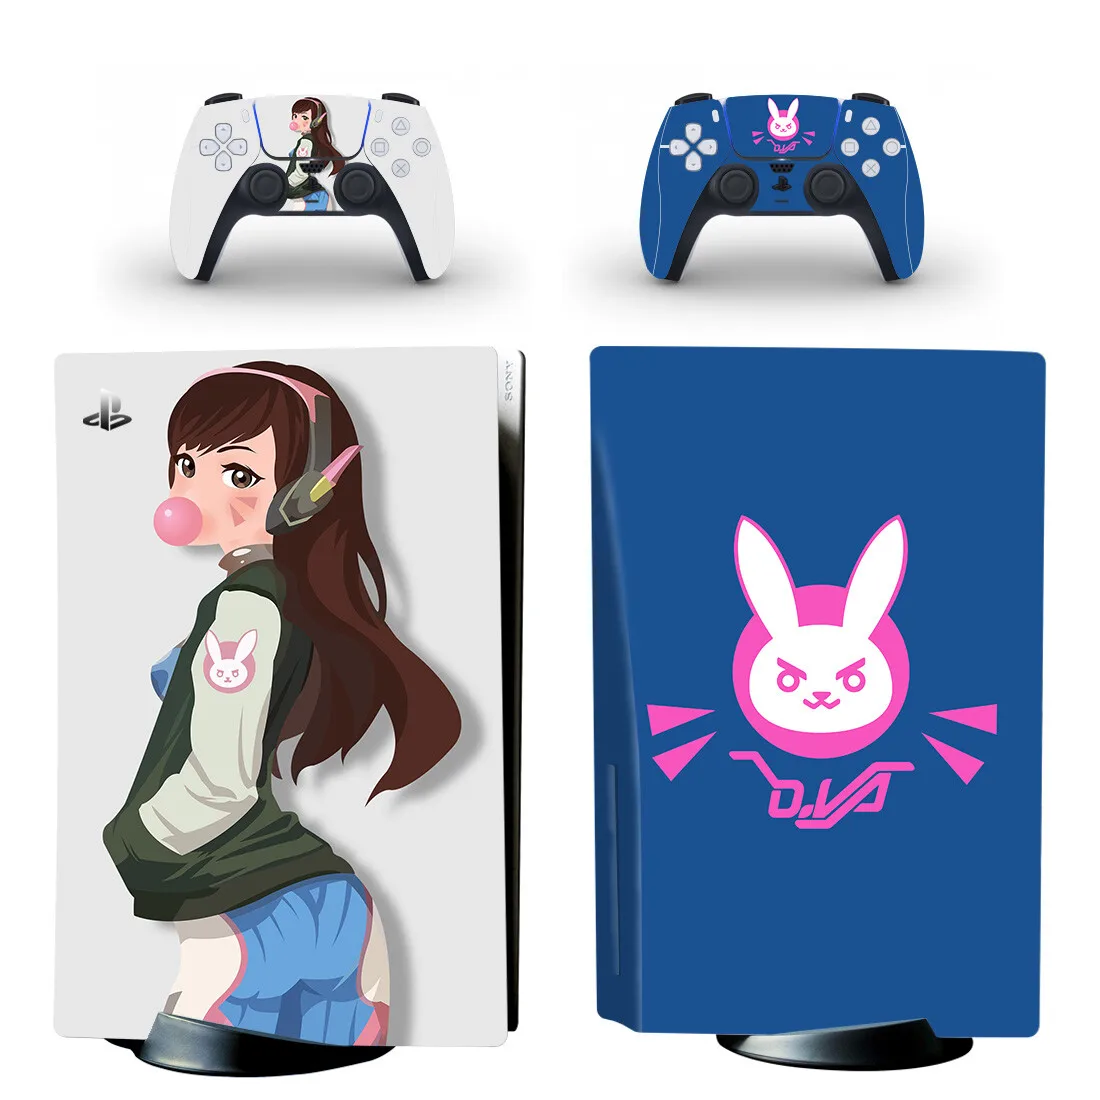 Anime Cute Girl DVA PS5 Standard Disc Sticker Decal Cover for PlayStation 5 Console and 2 Controllers PS5 Disk Skin Vinyl